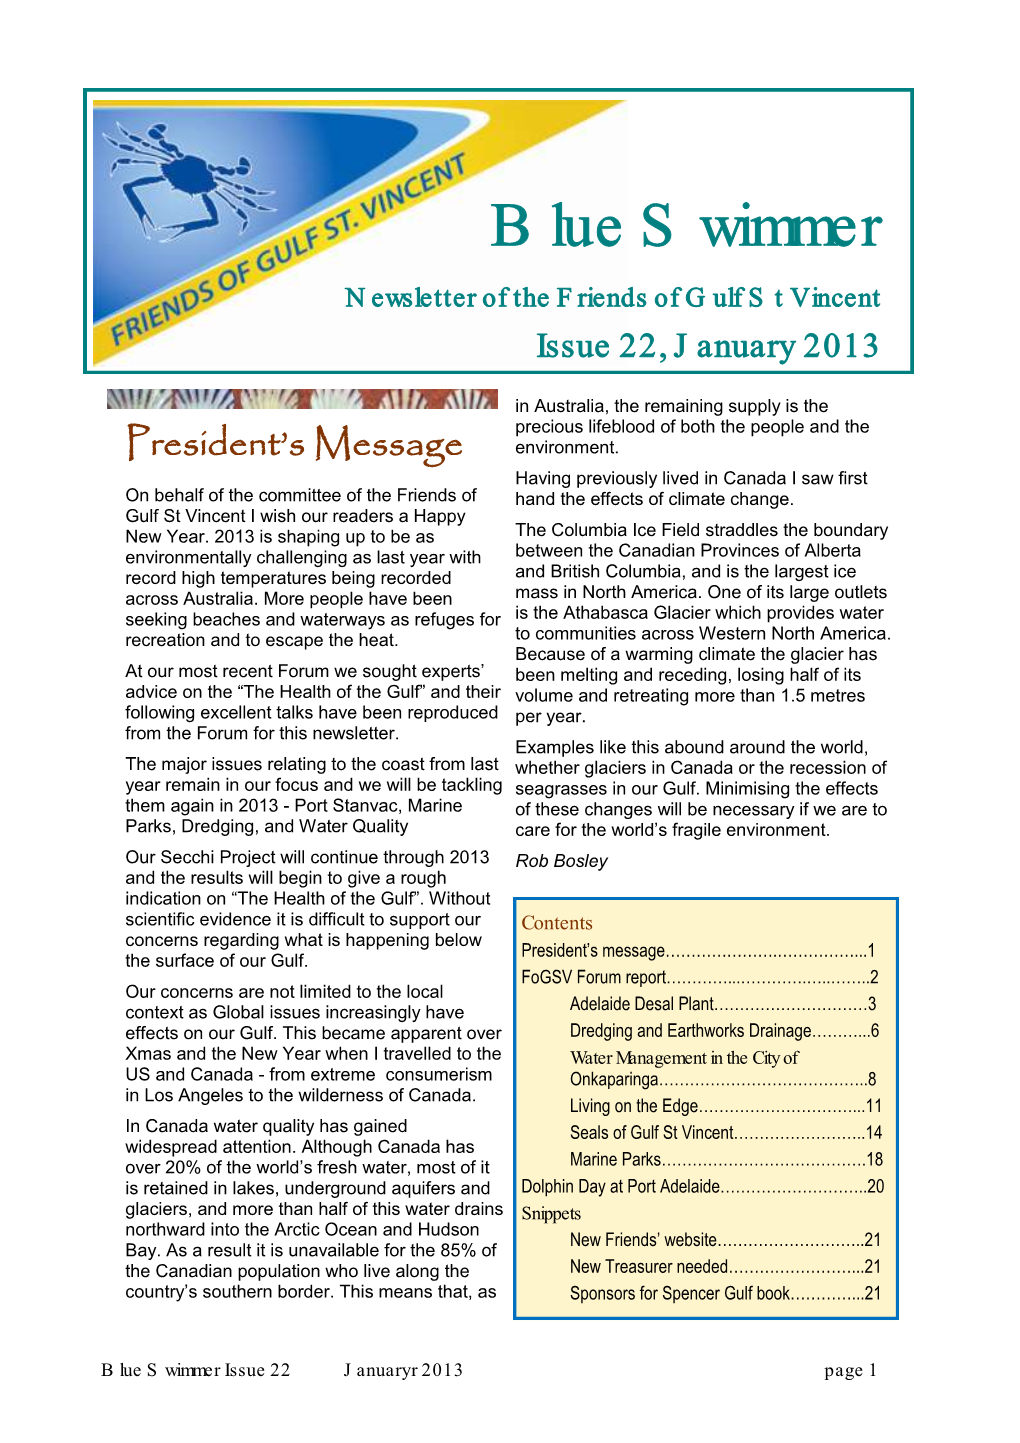 Blue Swimmer Newsletter of the Friends of Gulf St Vincent Issue 22, January 2013